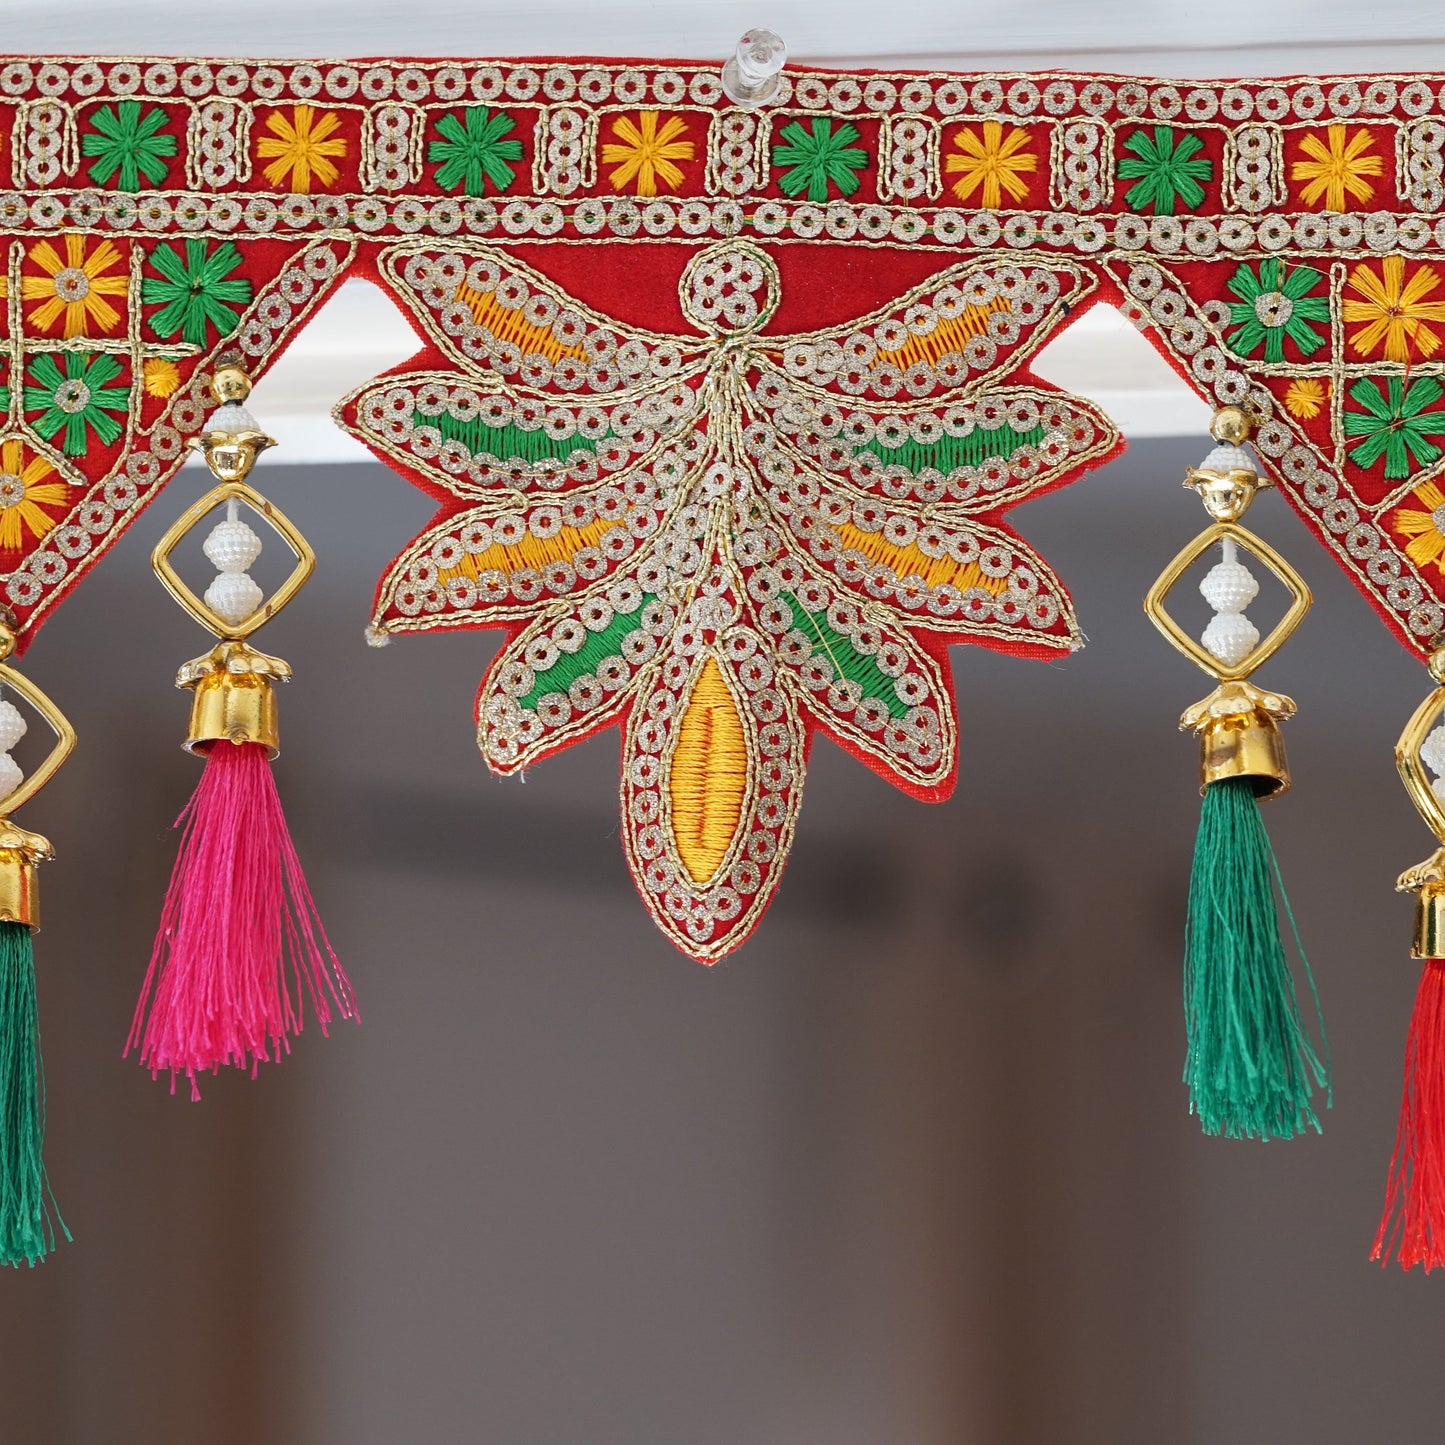 Indian bohemian door decoration with leaves embroidery - Aangan of India